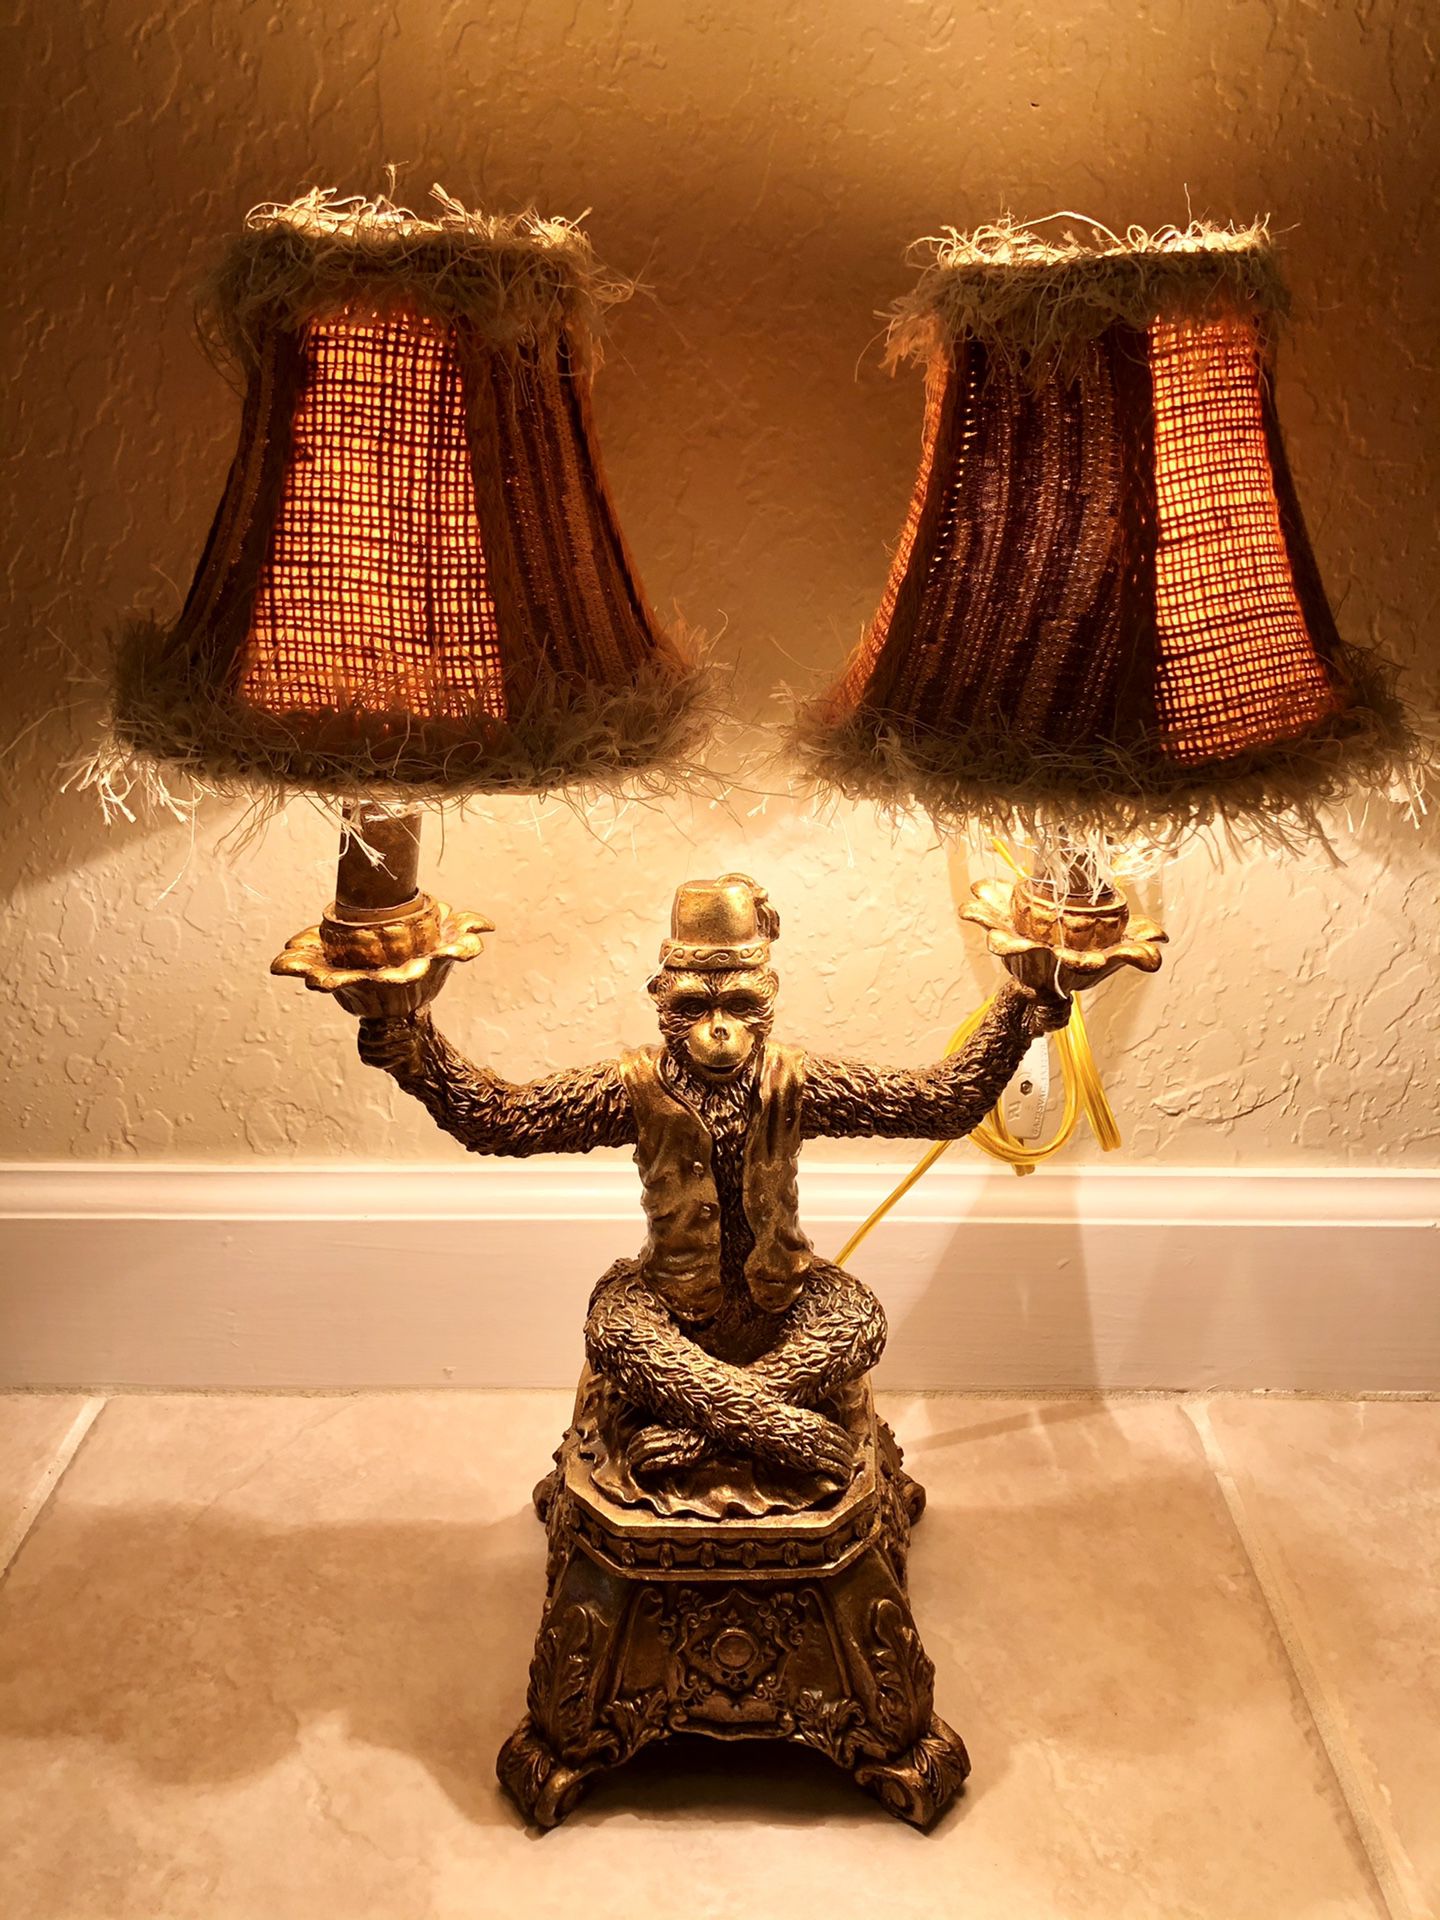 Vintage Bronze MONKEY Lamp in MINT CONDITION with 2 New Lampshades in original packaging